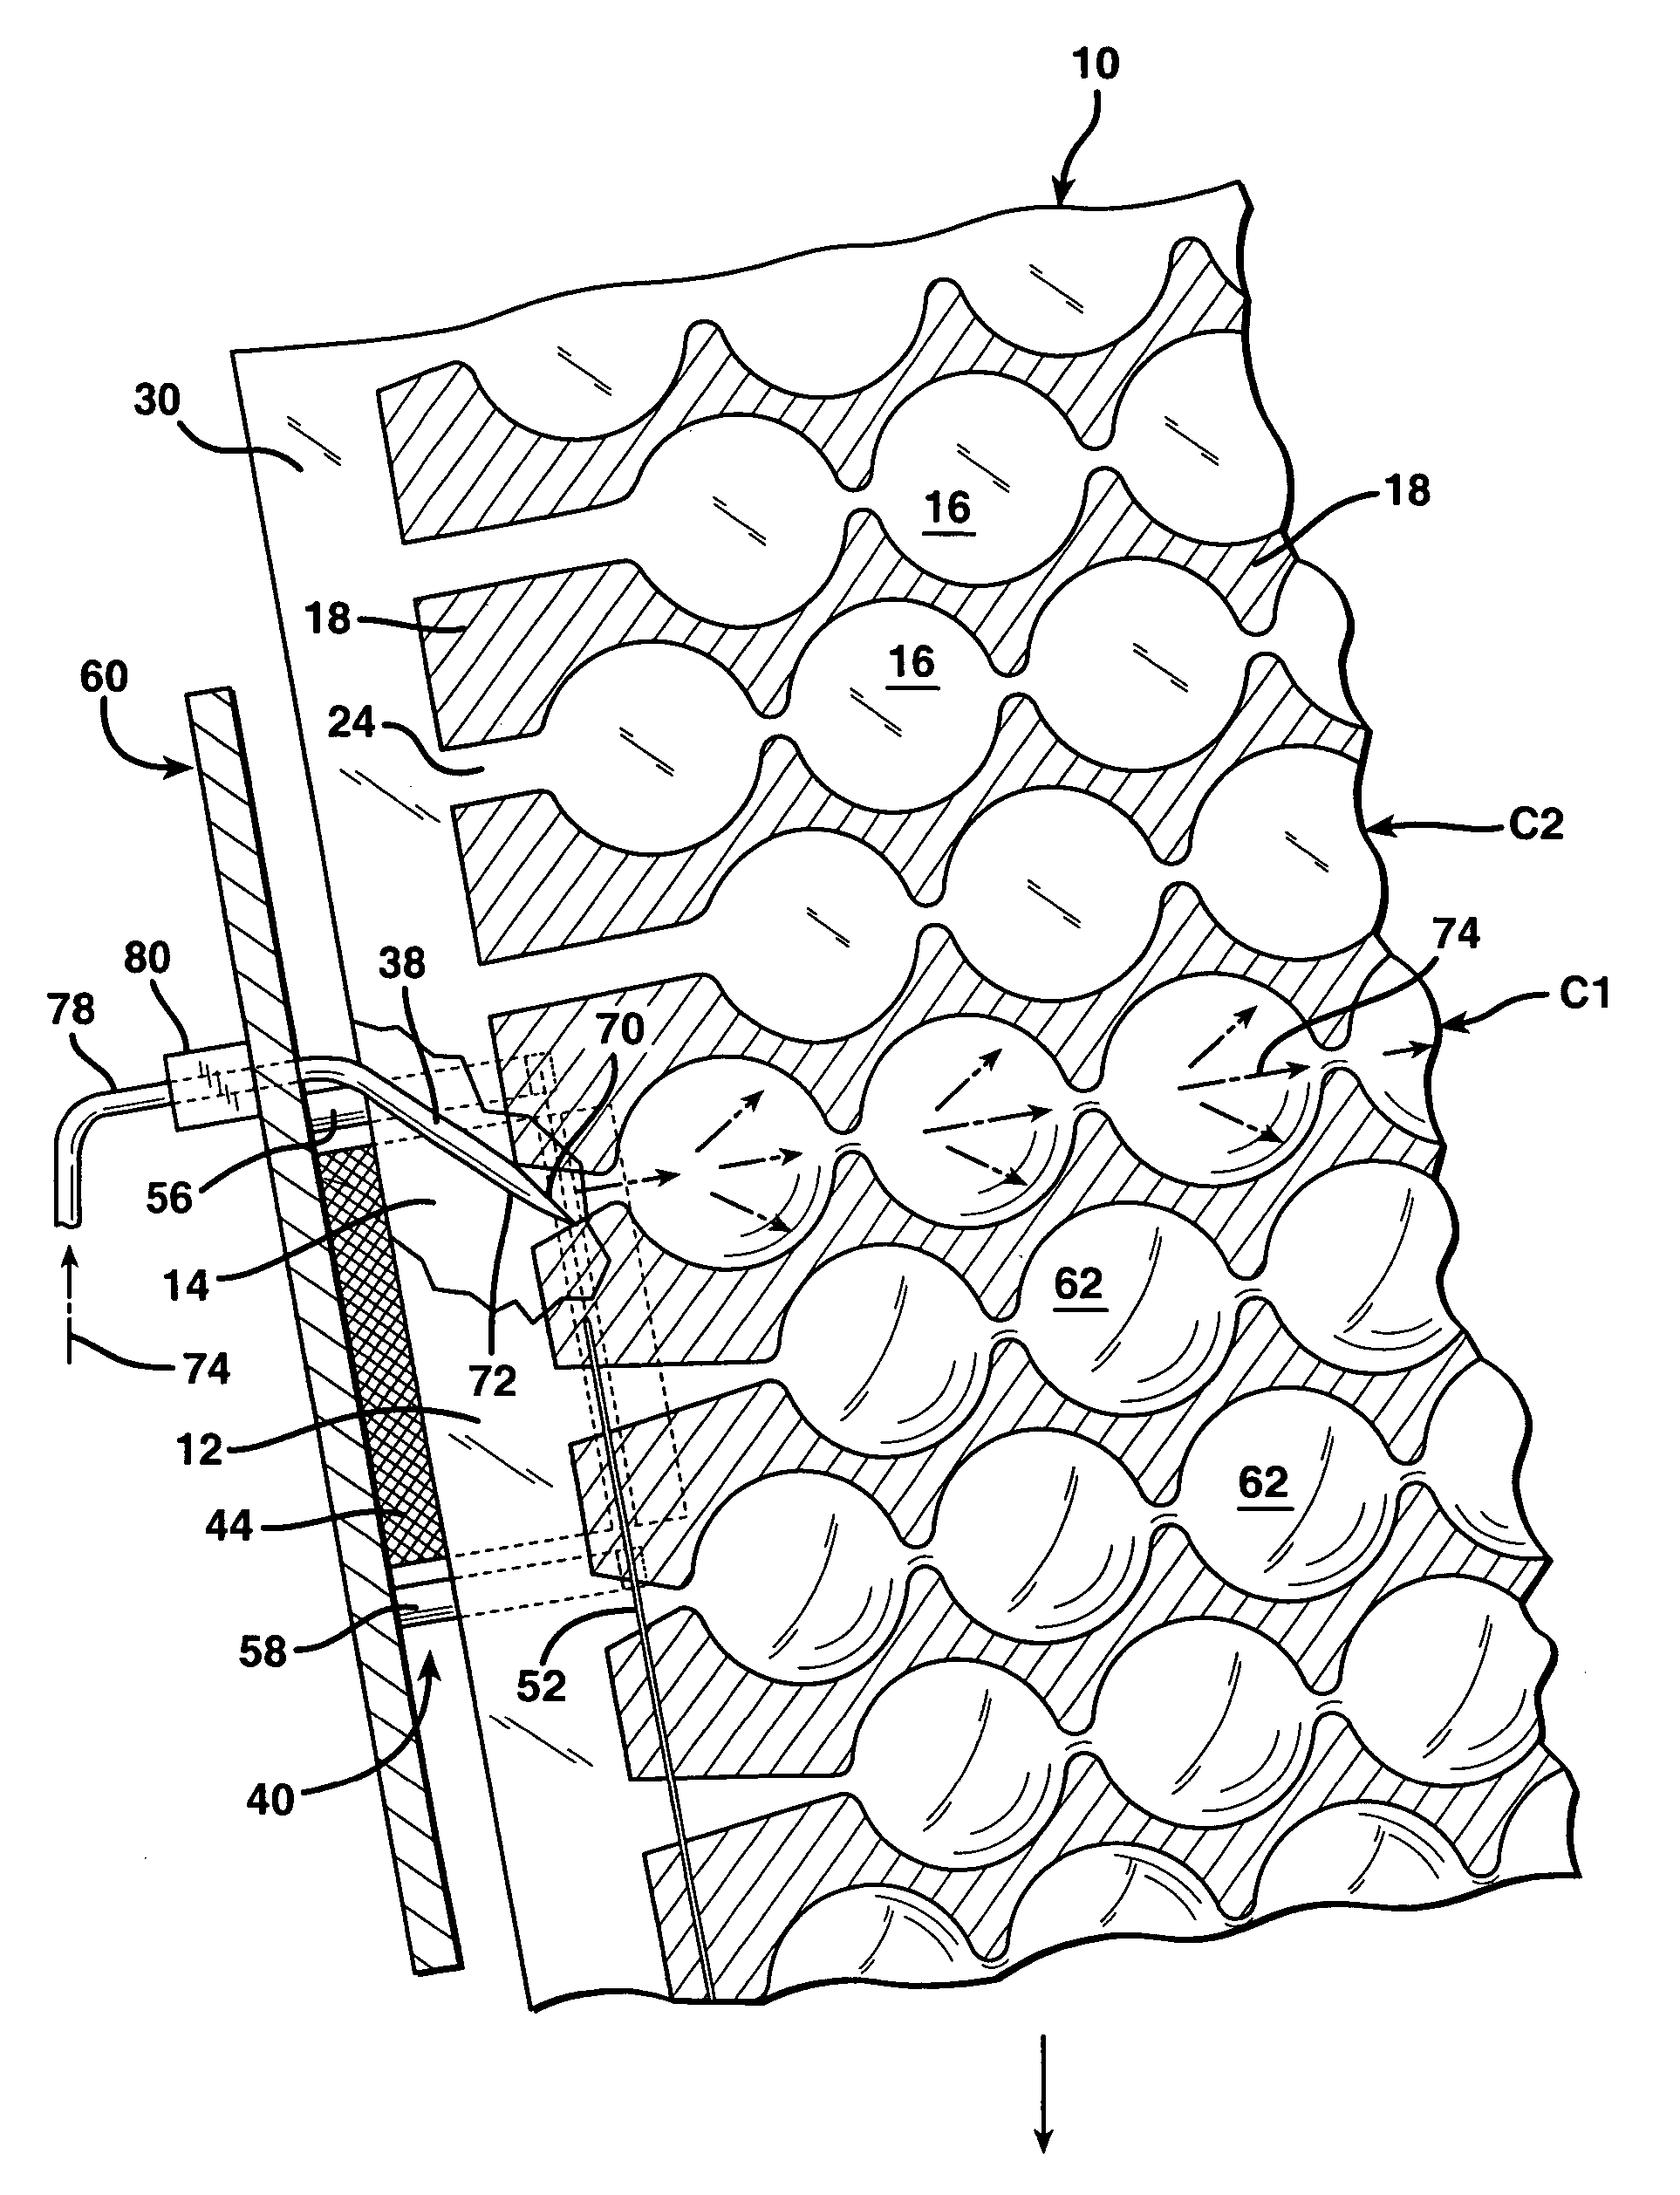 Apparatus and method for forming inflated chambers